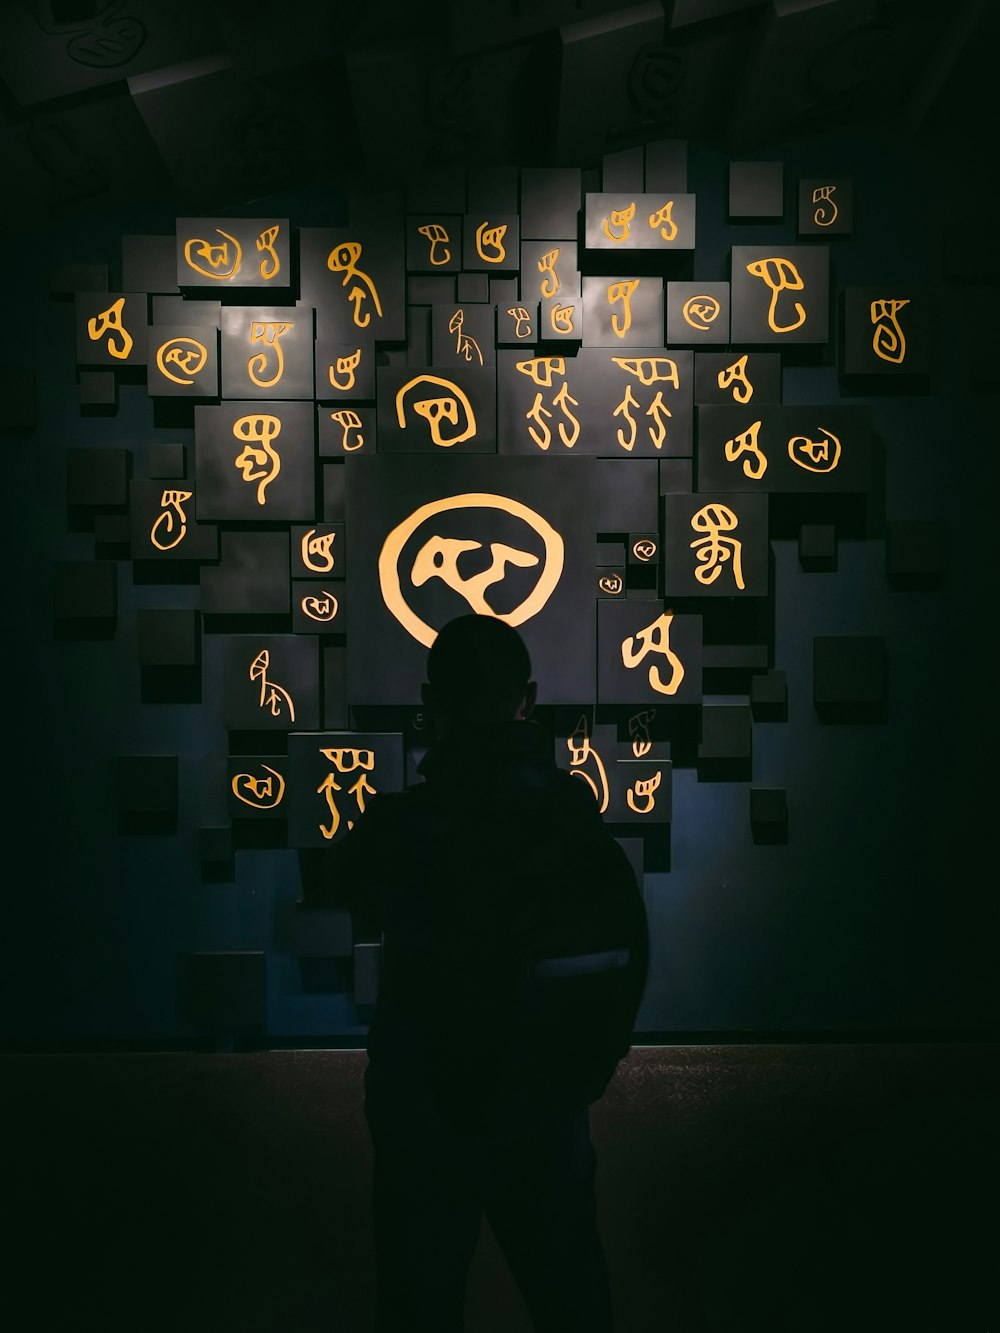 a person standing in front of a wall with a number of symbols on it